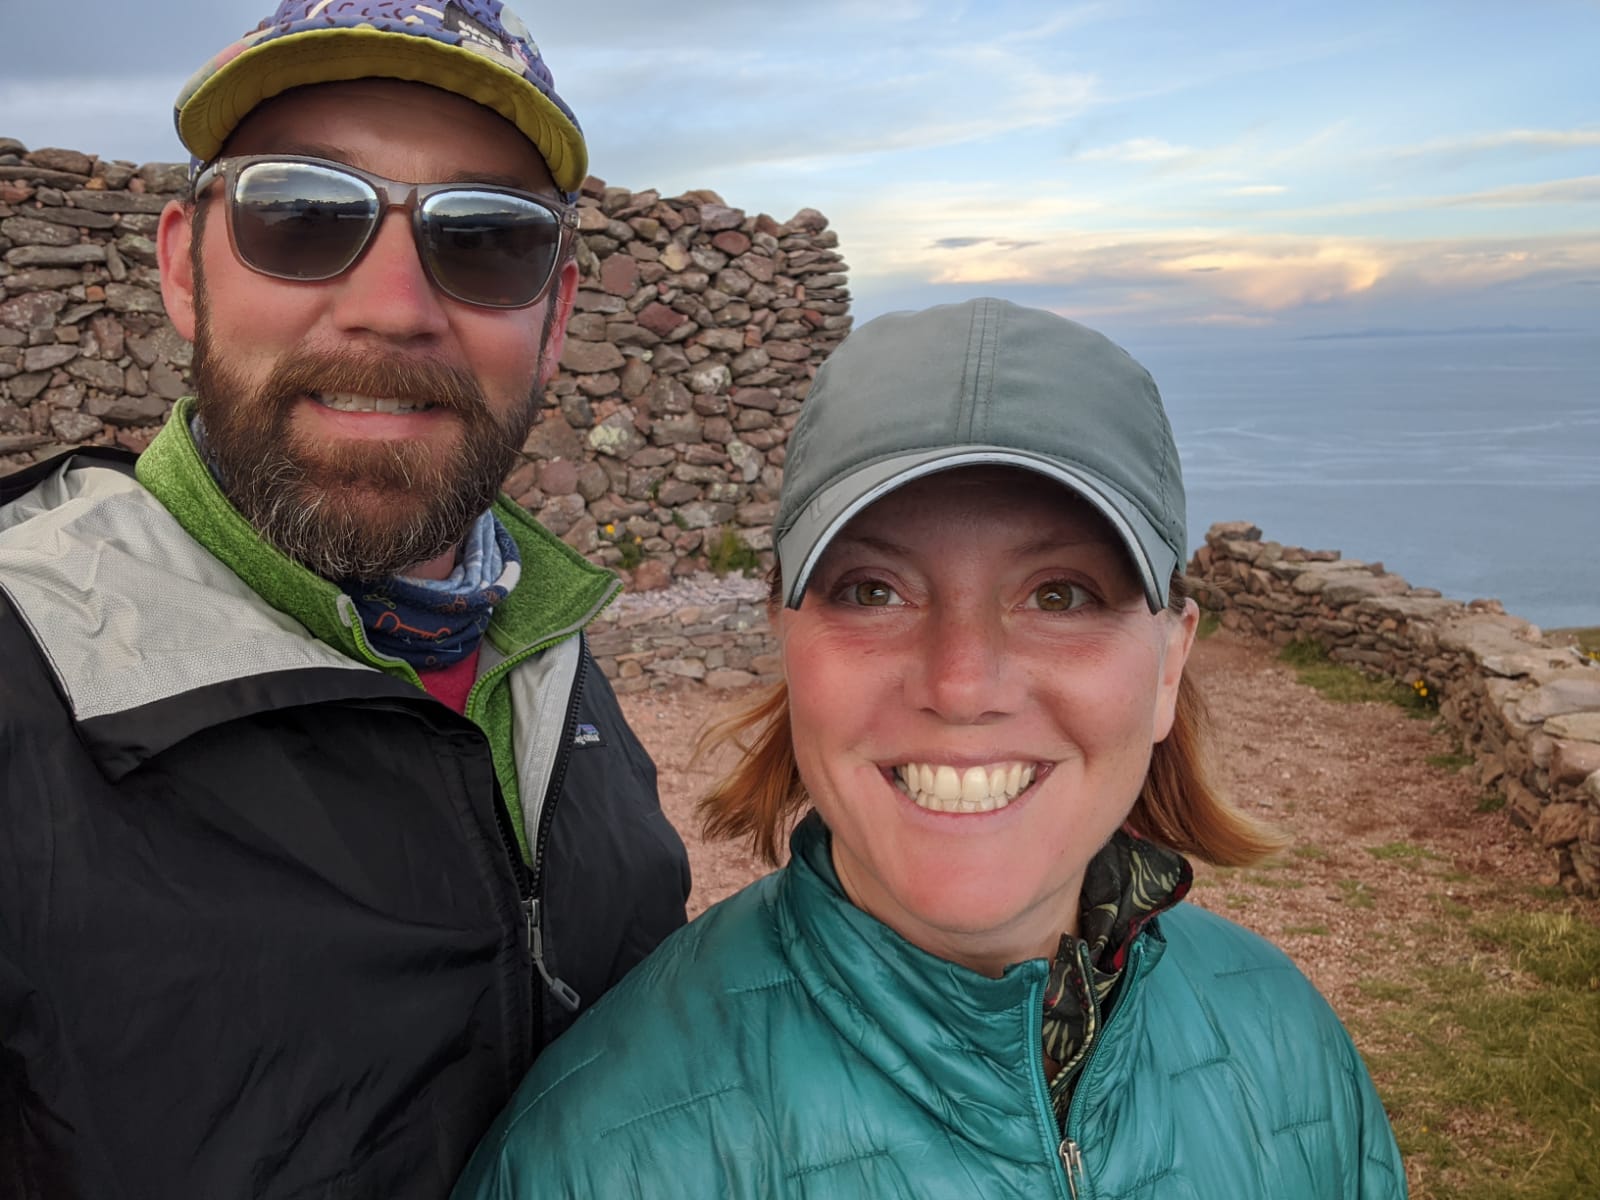 Melissa and Reuben Stugart got caught in the lockdown in Peru while on vacation. They say they plan to ride out the quarantine as best they can in Cusco.